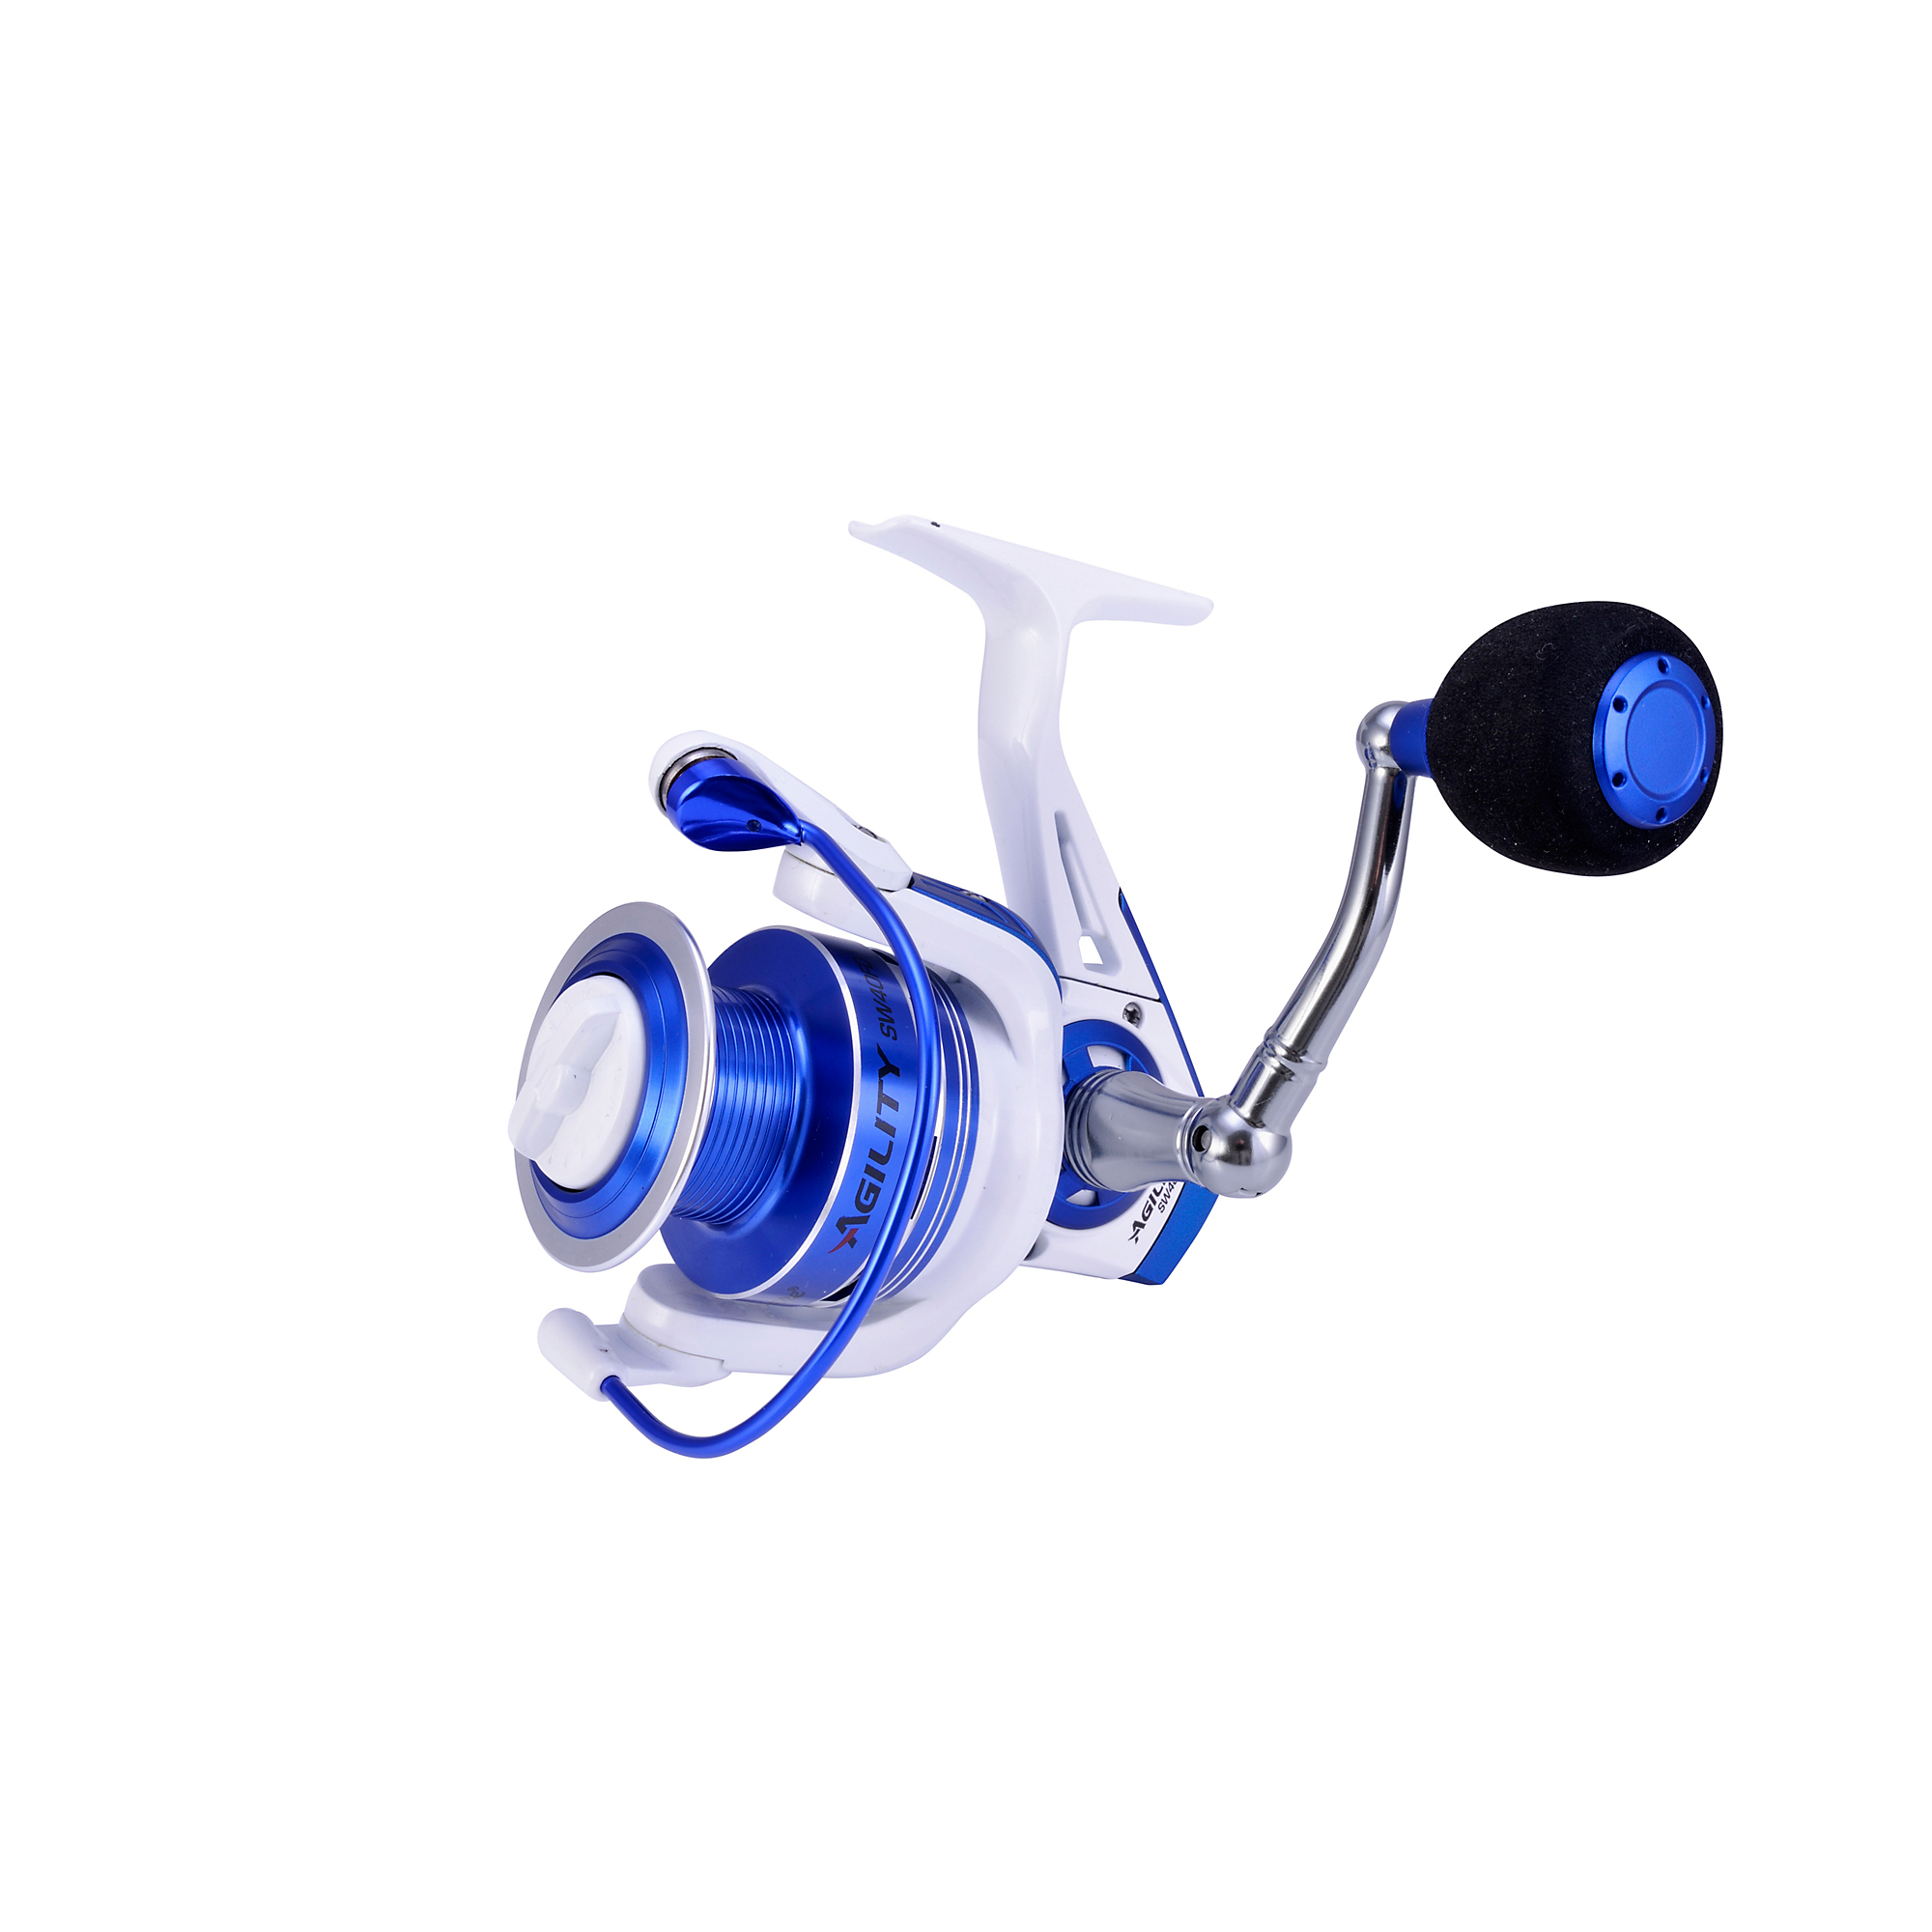 Shakespeare Agility Saltwater FD Reel – Glasgow Angling Centre